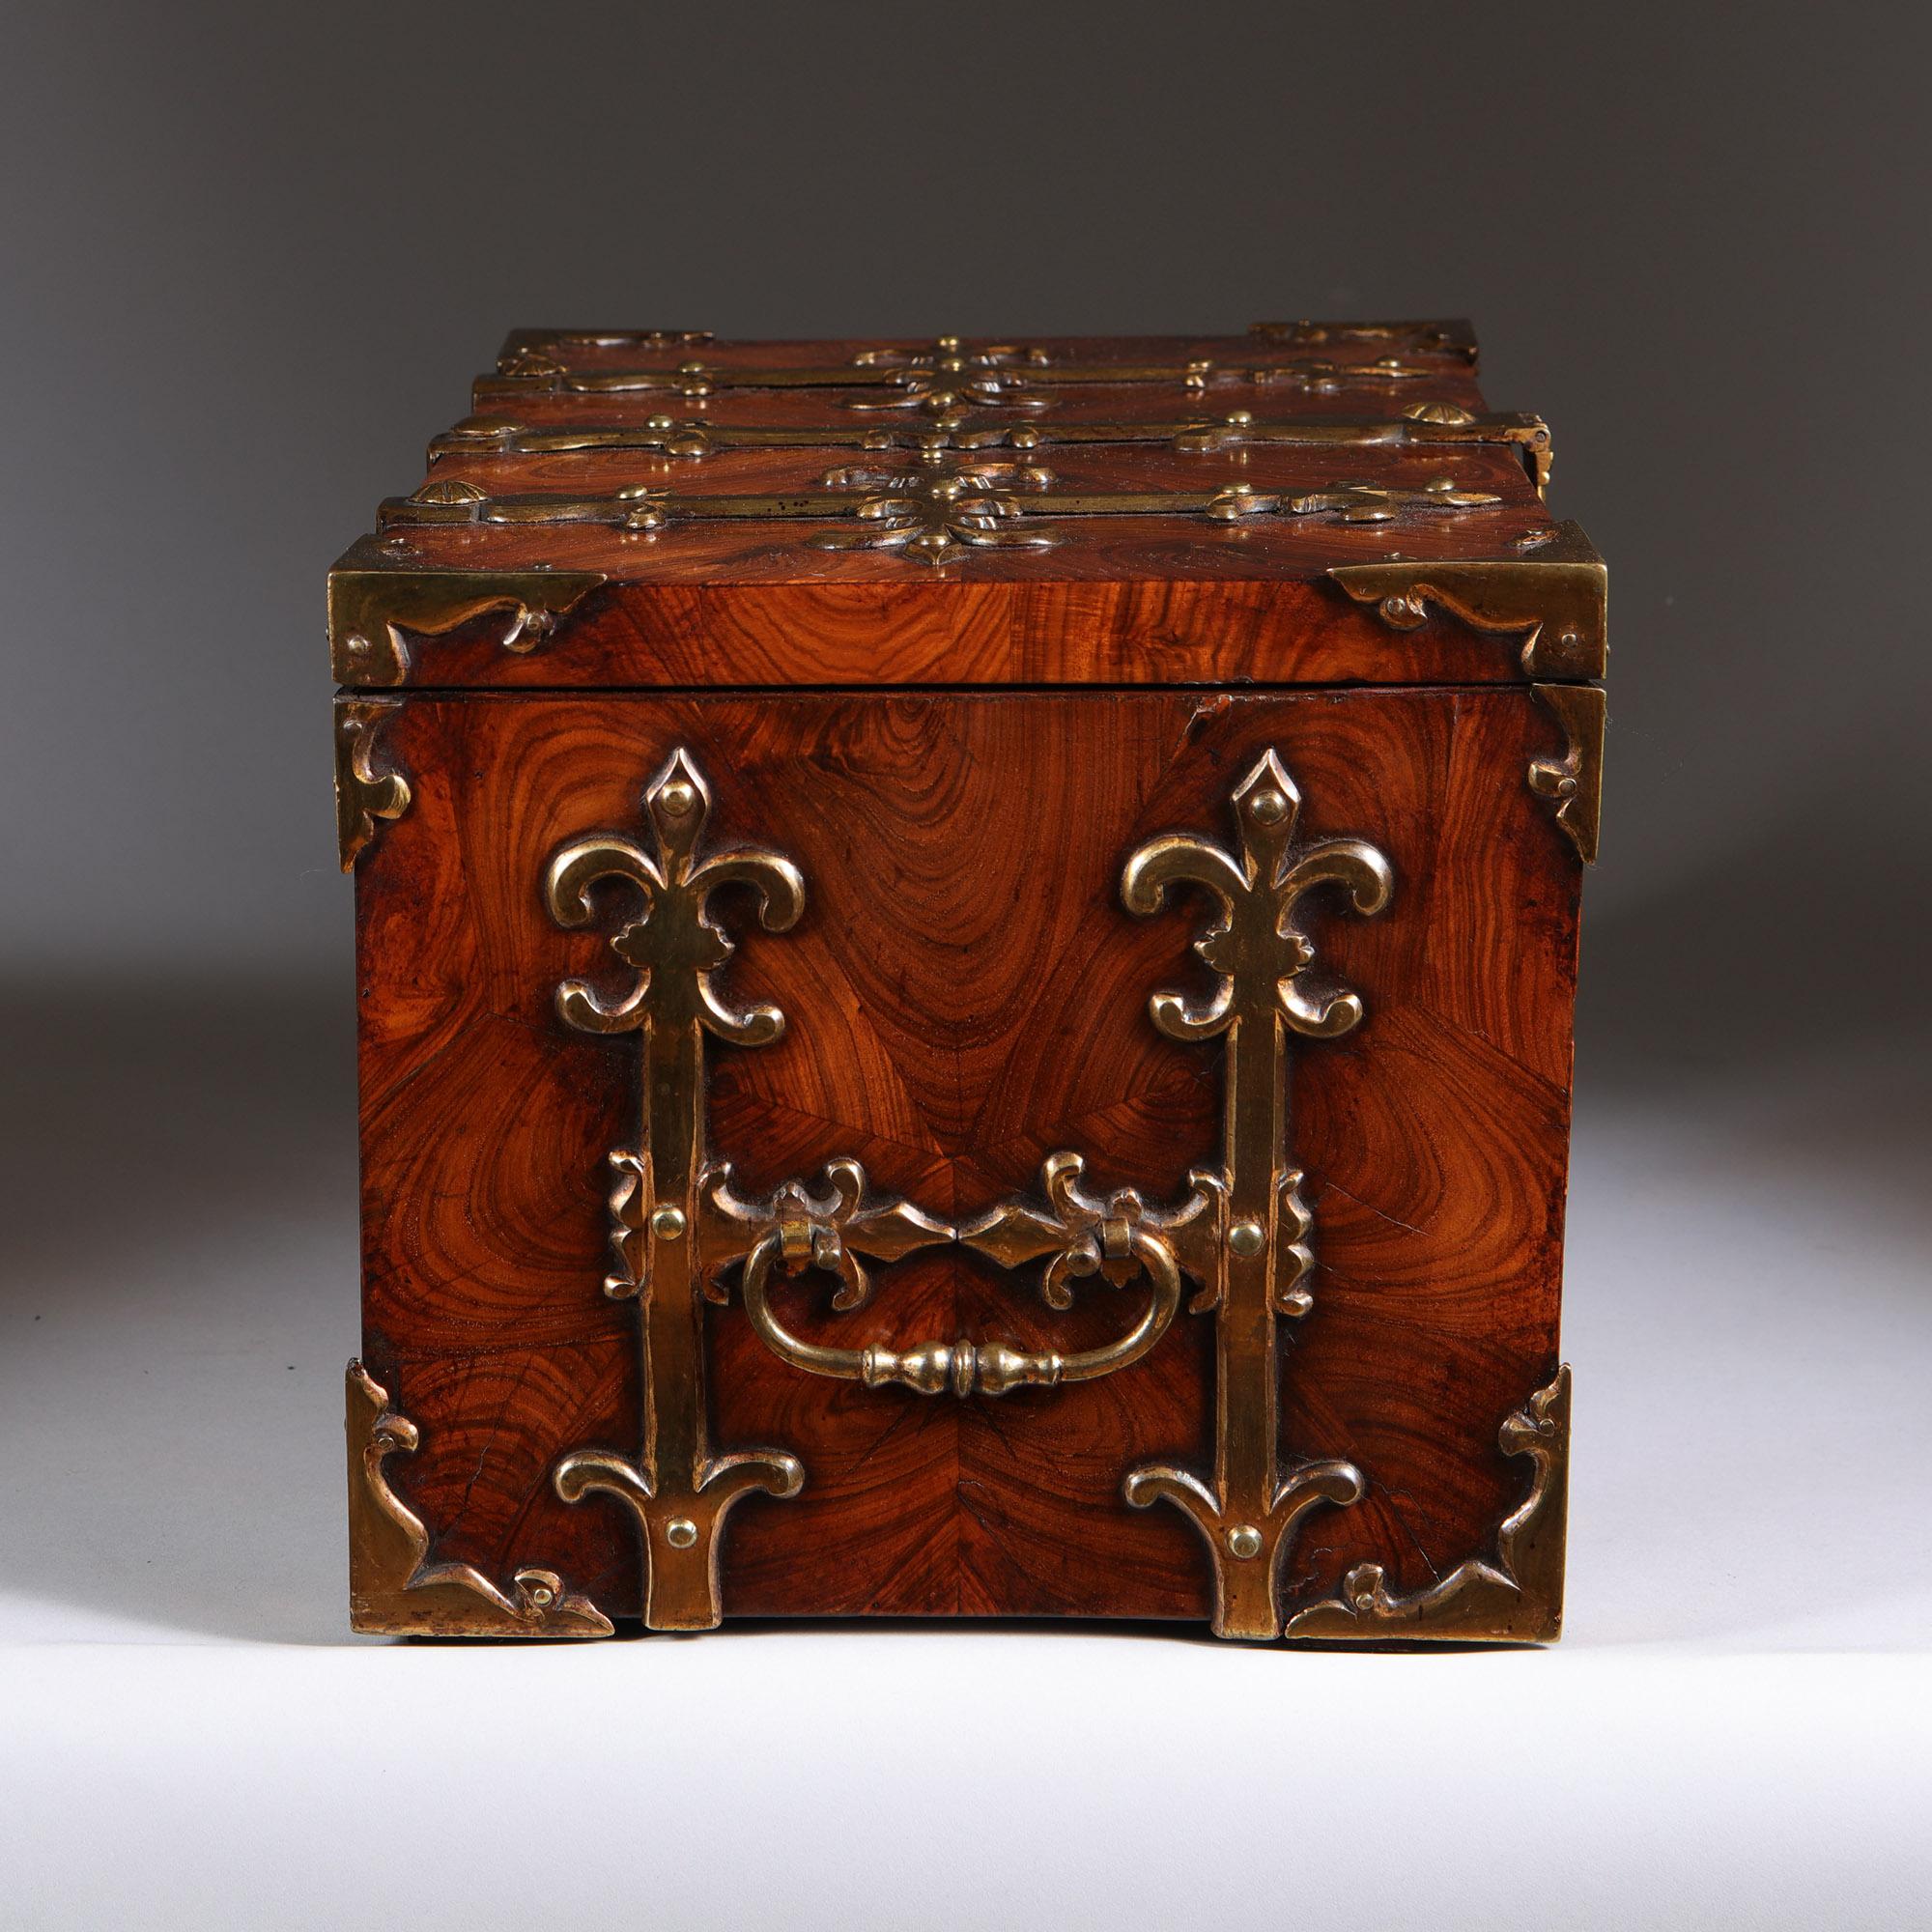 A Fine 17th C. William and Mary Kingwood Strongbox or Coffre Fort, Circa 1690 In Good Condition For Sale In Oxfordshire, United Kingdom